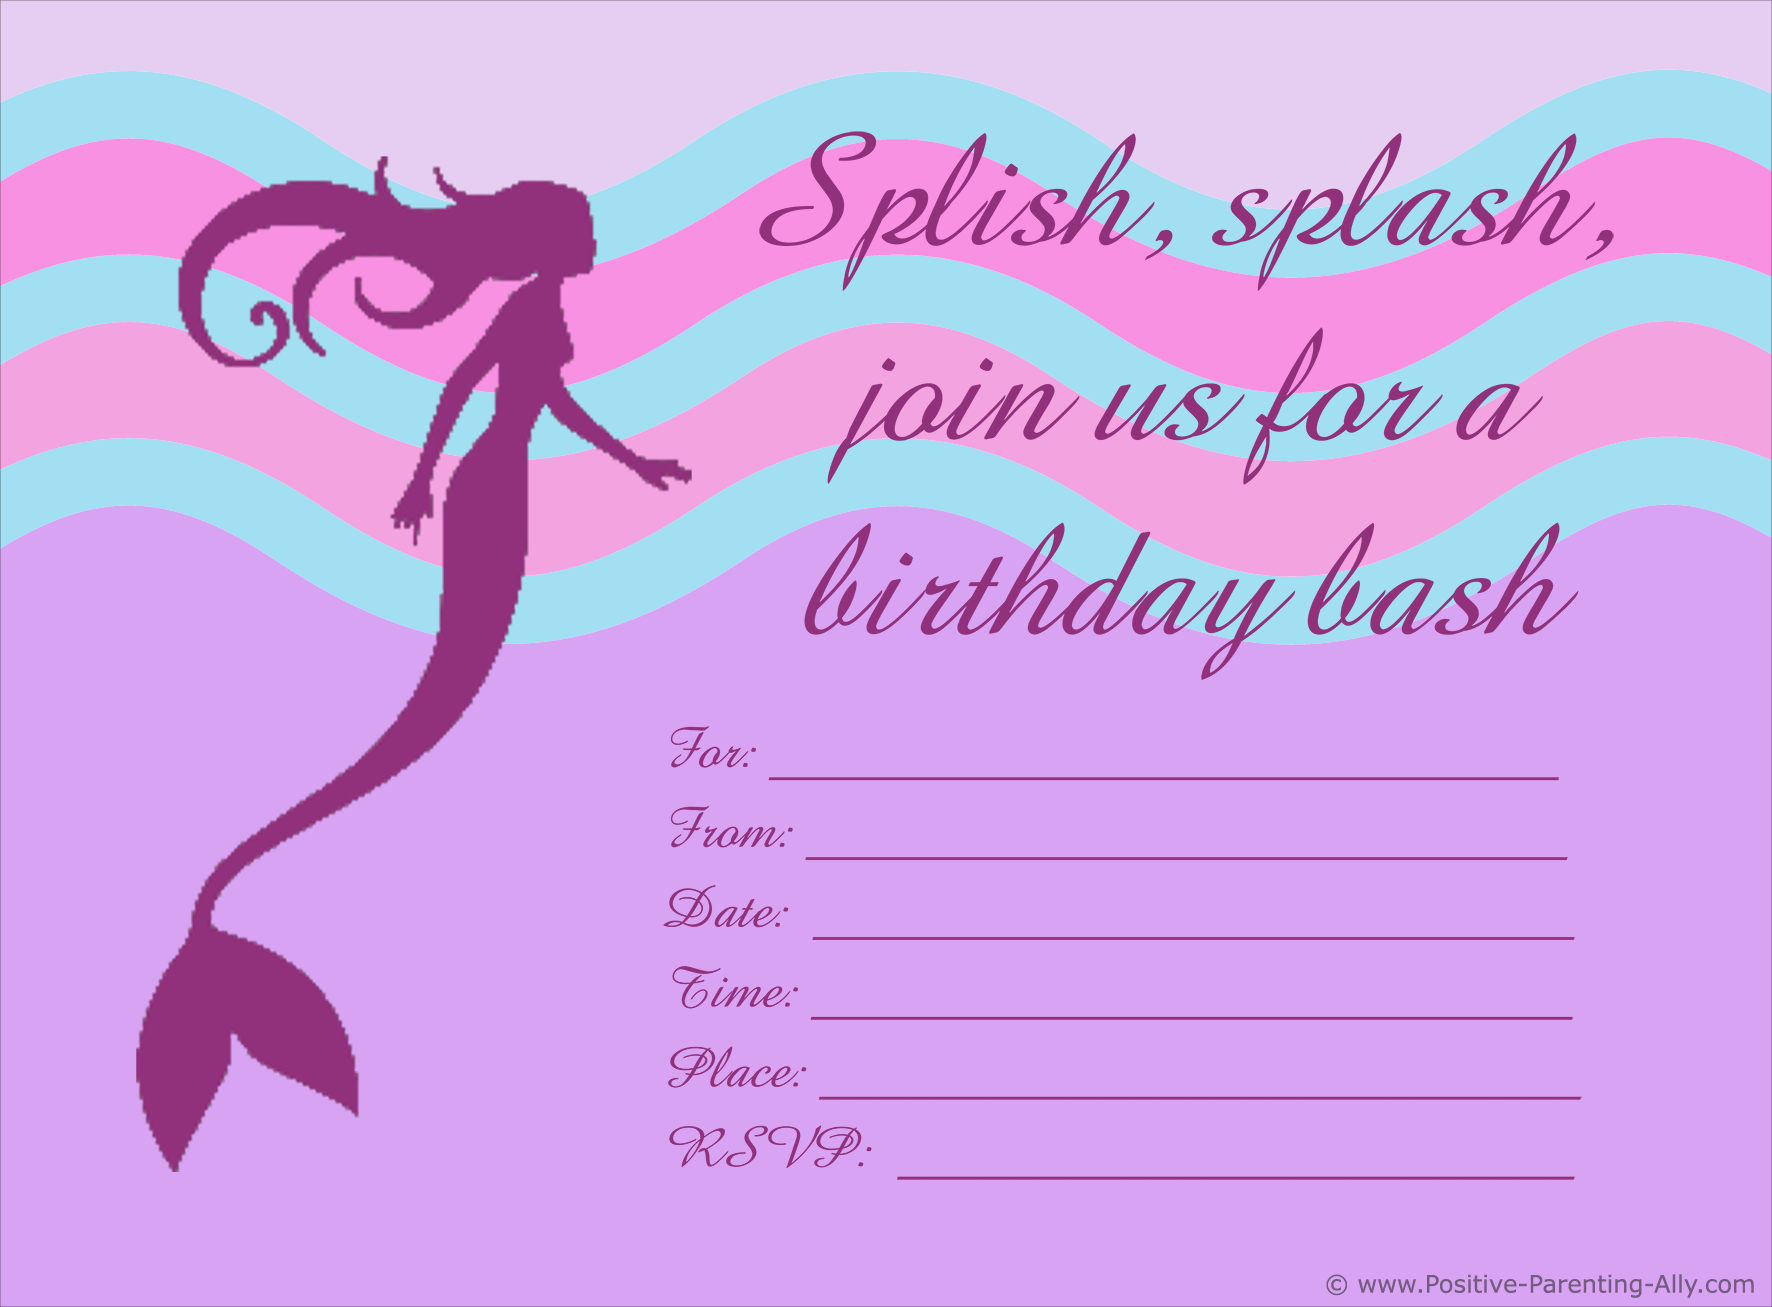 Free Birthday Party Invites For Kids In High Print Quality - Free Printable Birthday Party Invitations With Photo